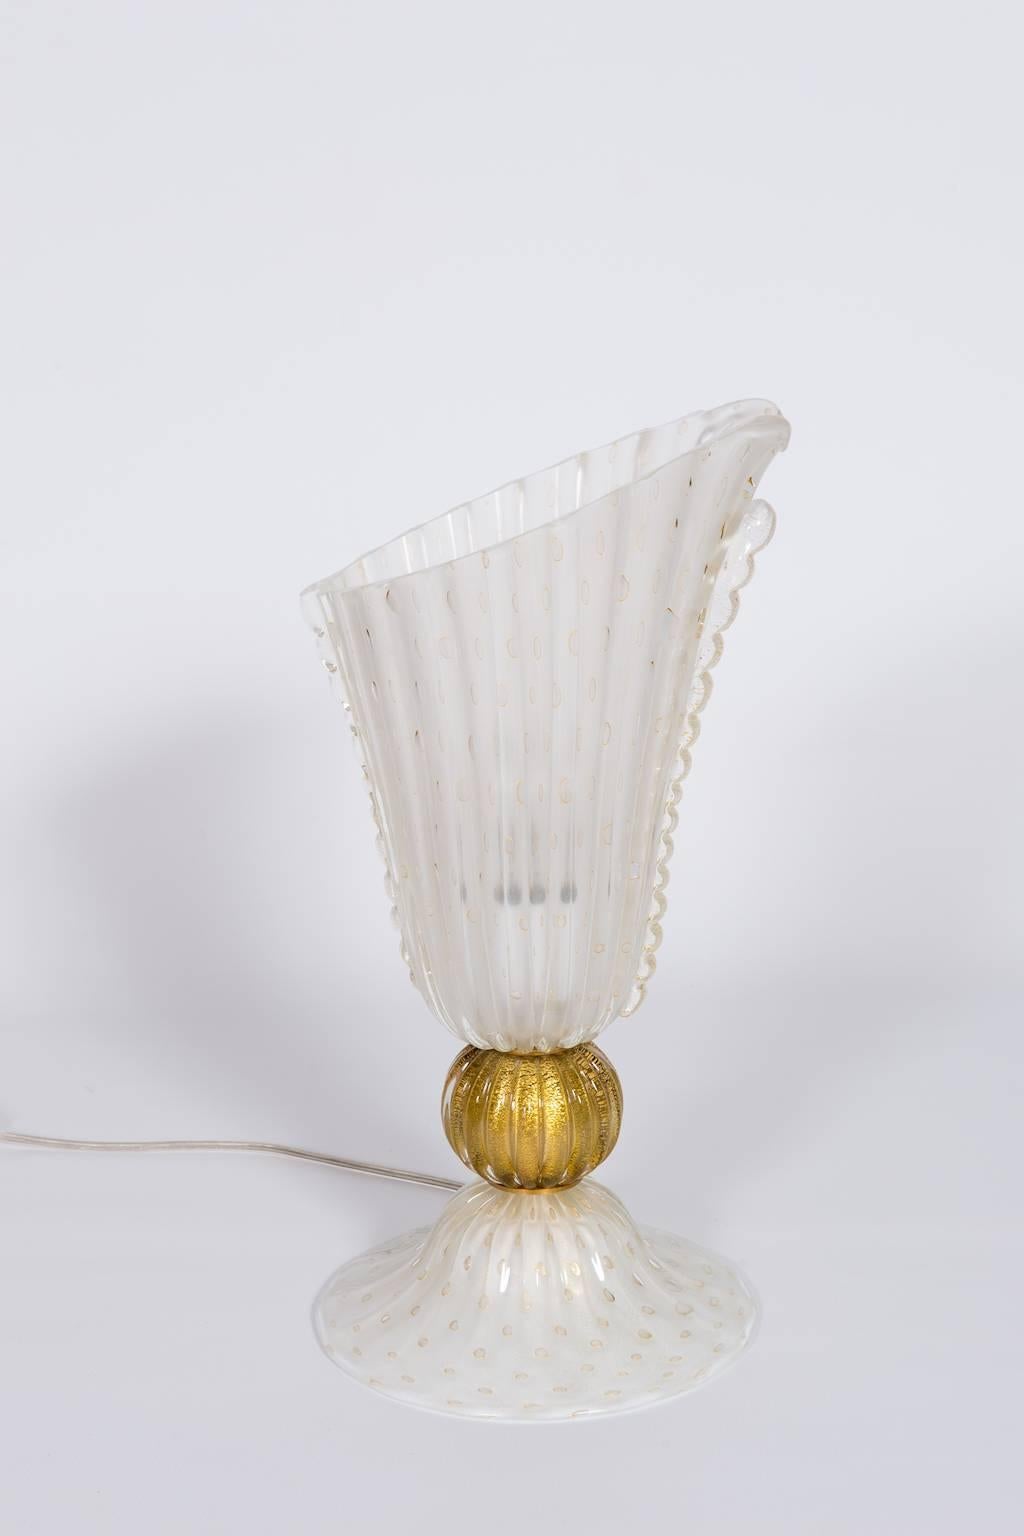 Unique Italian Table Lamp in Blown Murano Glass, white color and with 24-karat gold finishes. 
This outstanding work of art was entirely designed and handcrafted in the Italian Venetian Murano Island in the 1970s, and it is supported by its